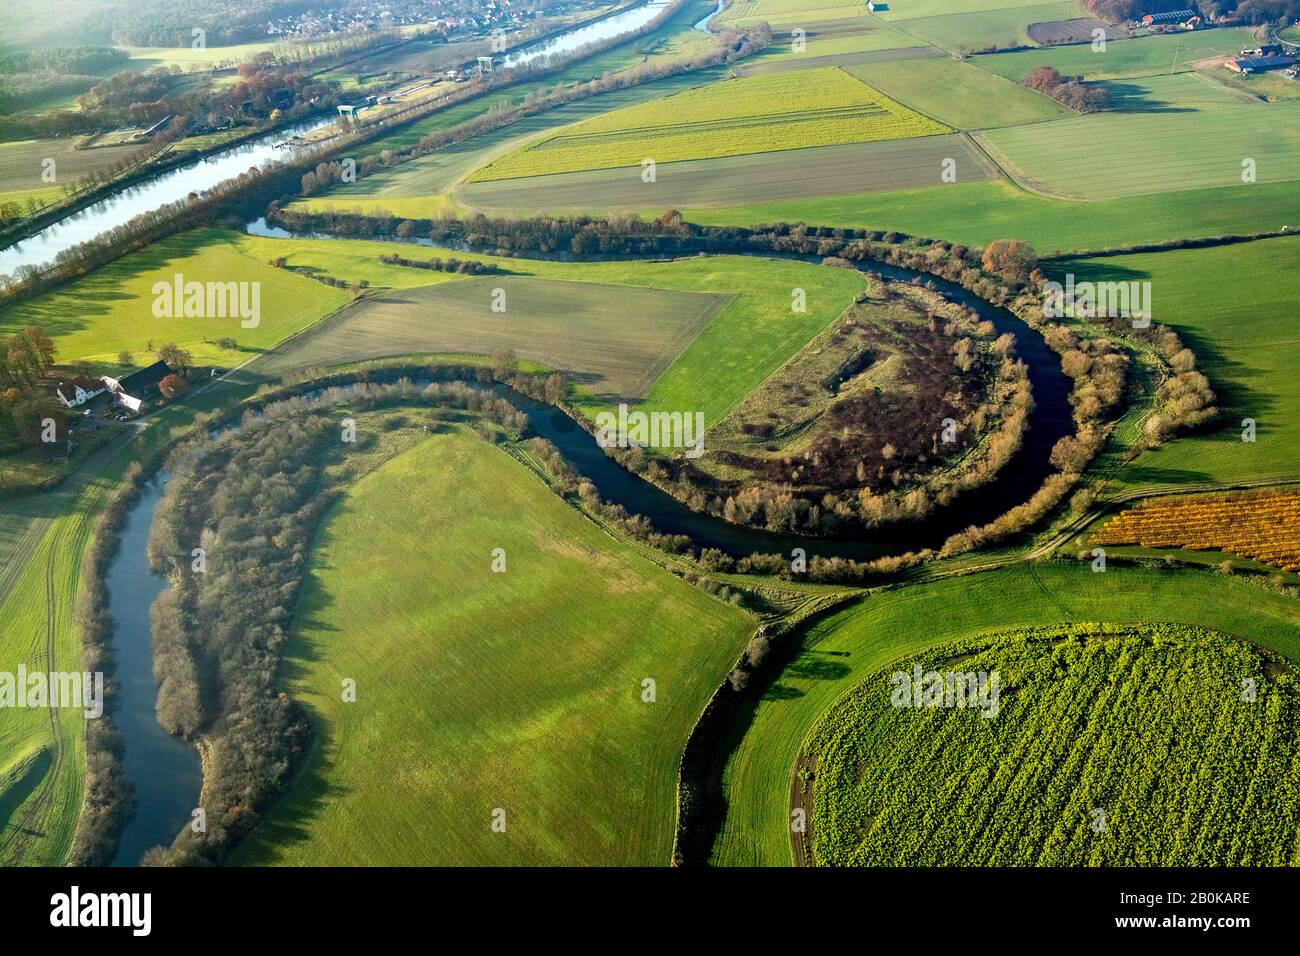 Aerial photograph, River Lippe, Lippe floodplain, serpentine form, Lippe meander, Wesel-Datteln canal, Haltern am See, Ruhr area, North Rhine-Westphal Stock Photo